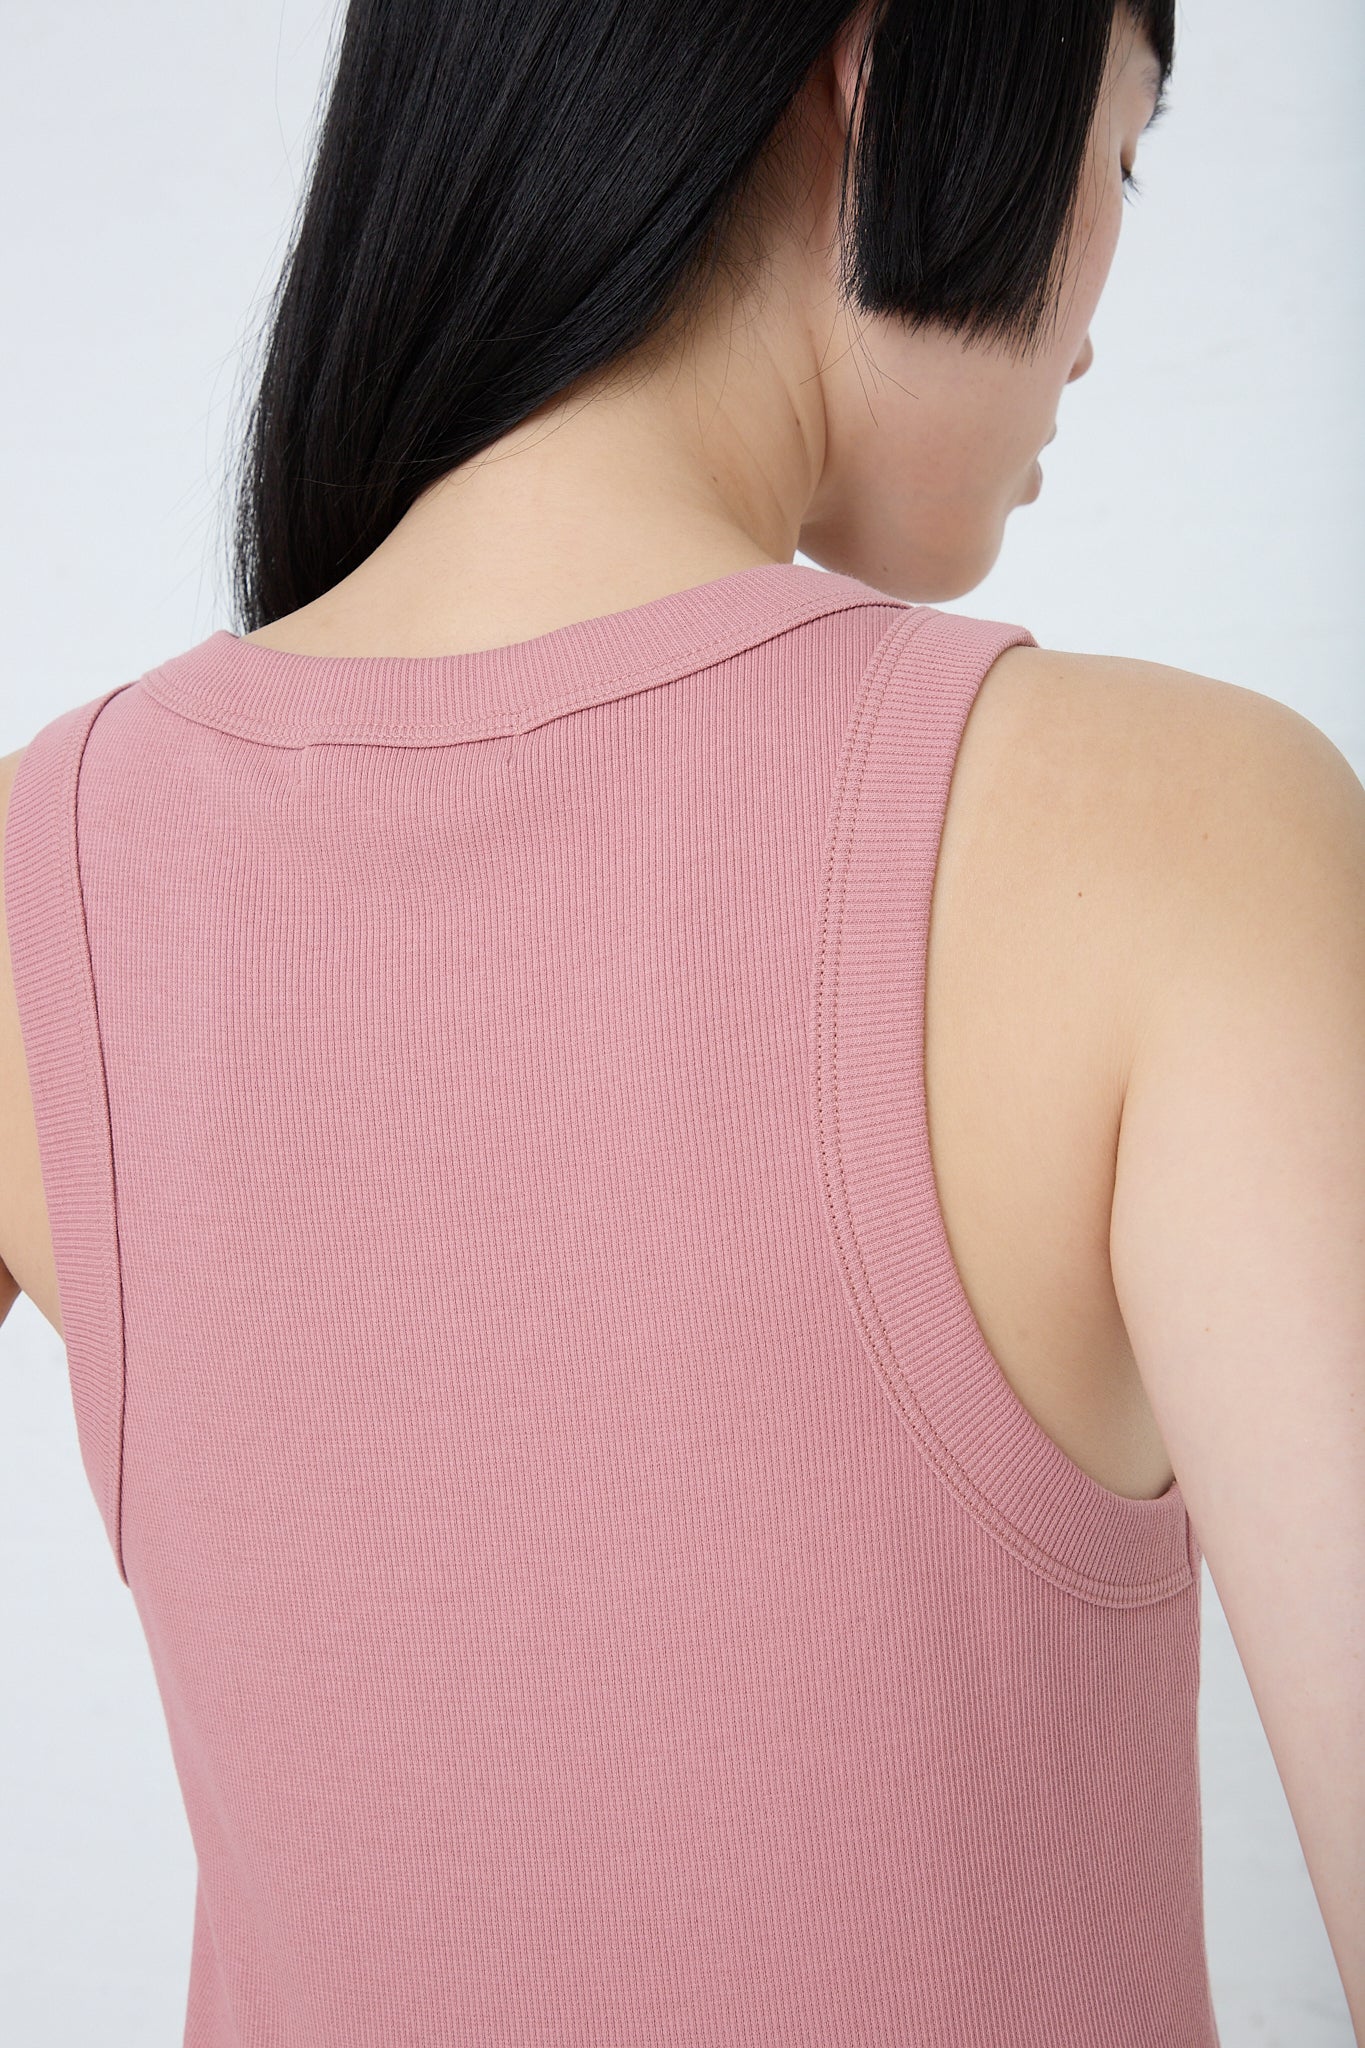 A woman is wearing a B Sides Rib Tank in Zinnia Overdye. Back view. Up close.